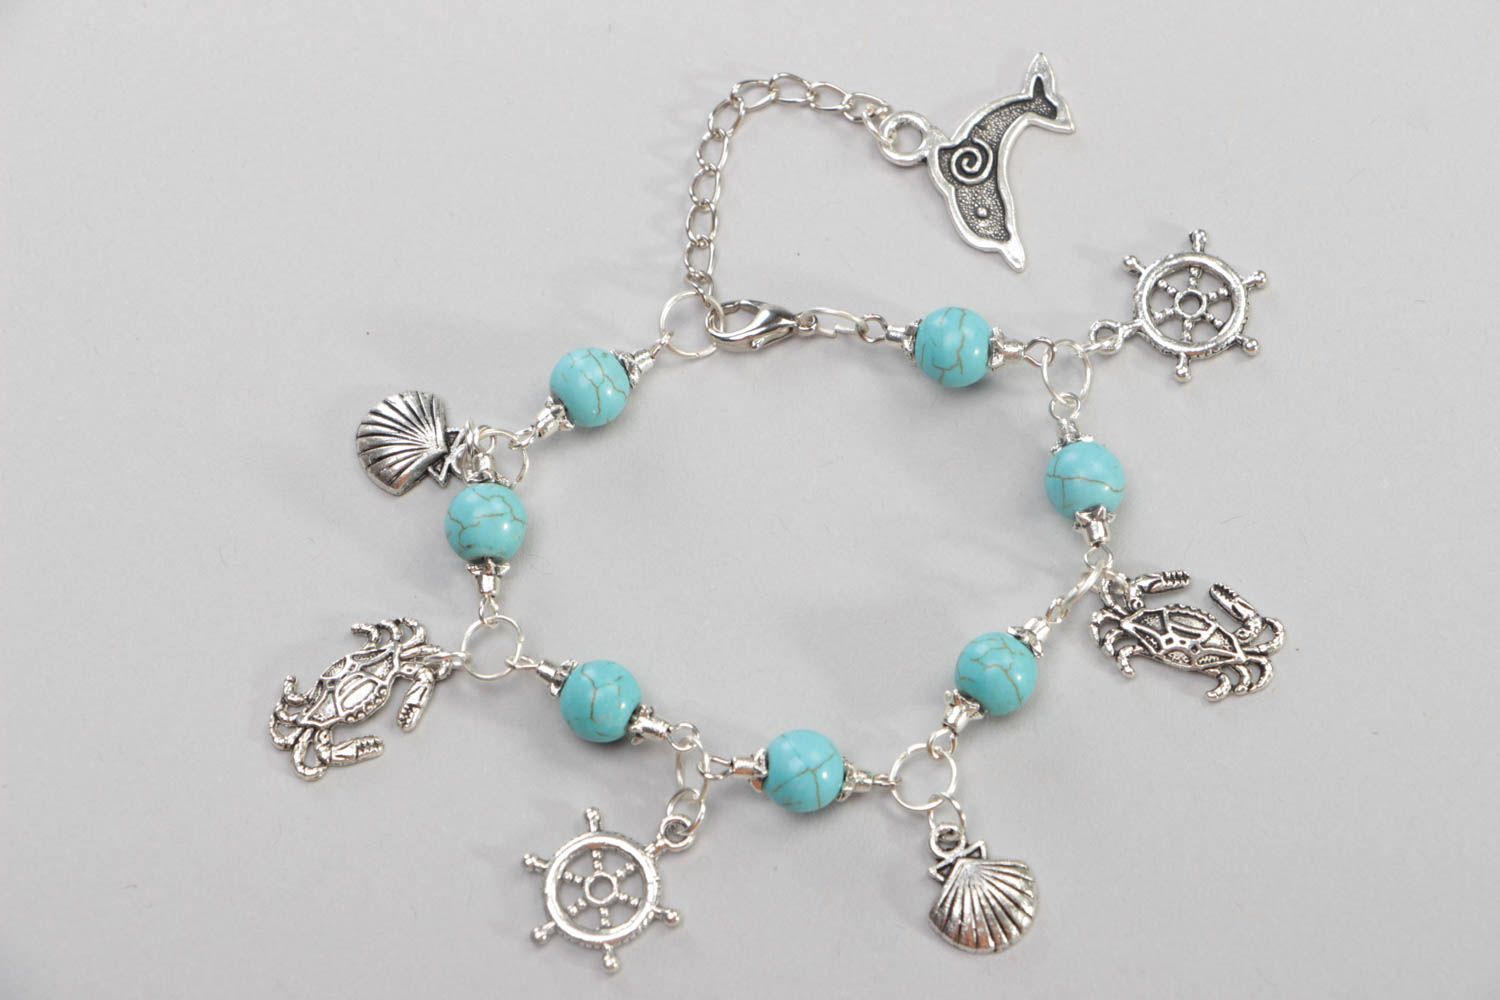 Handmade turquoise bracelet unusual accessory with metal charms cute jewelry photo 2